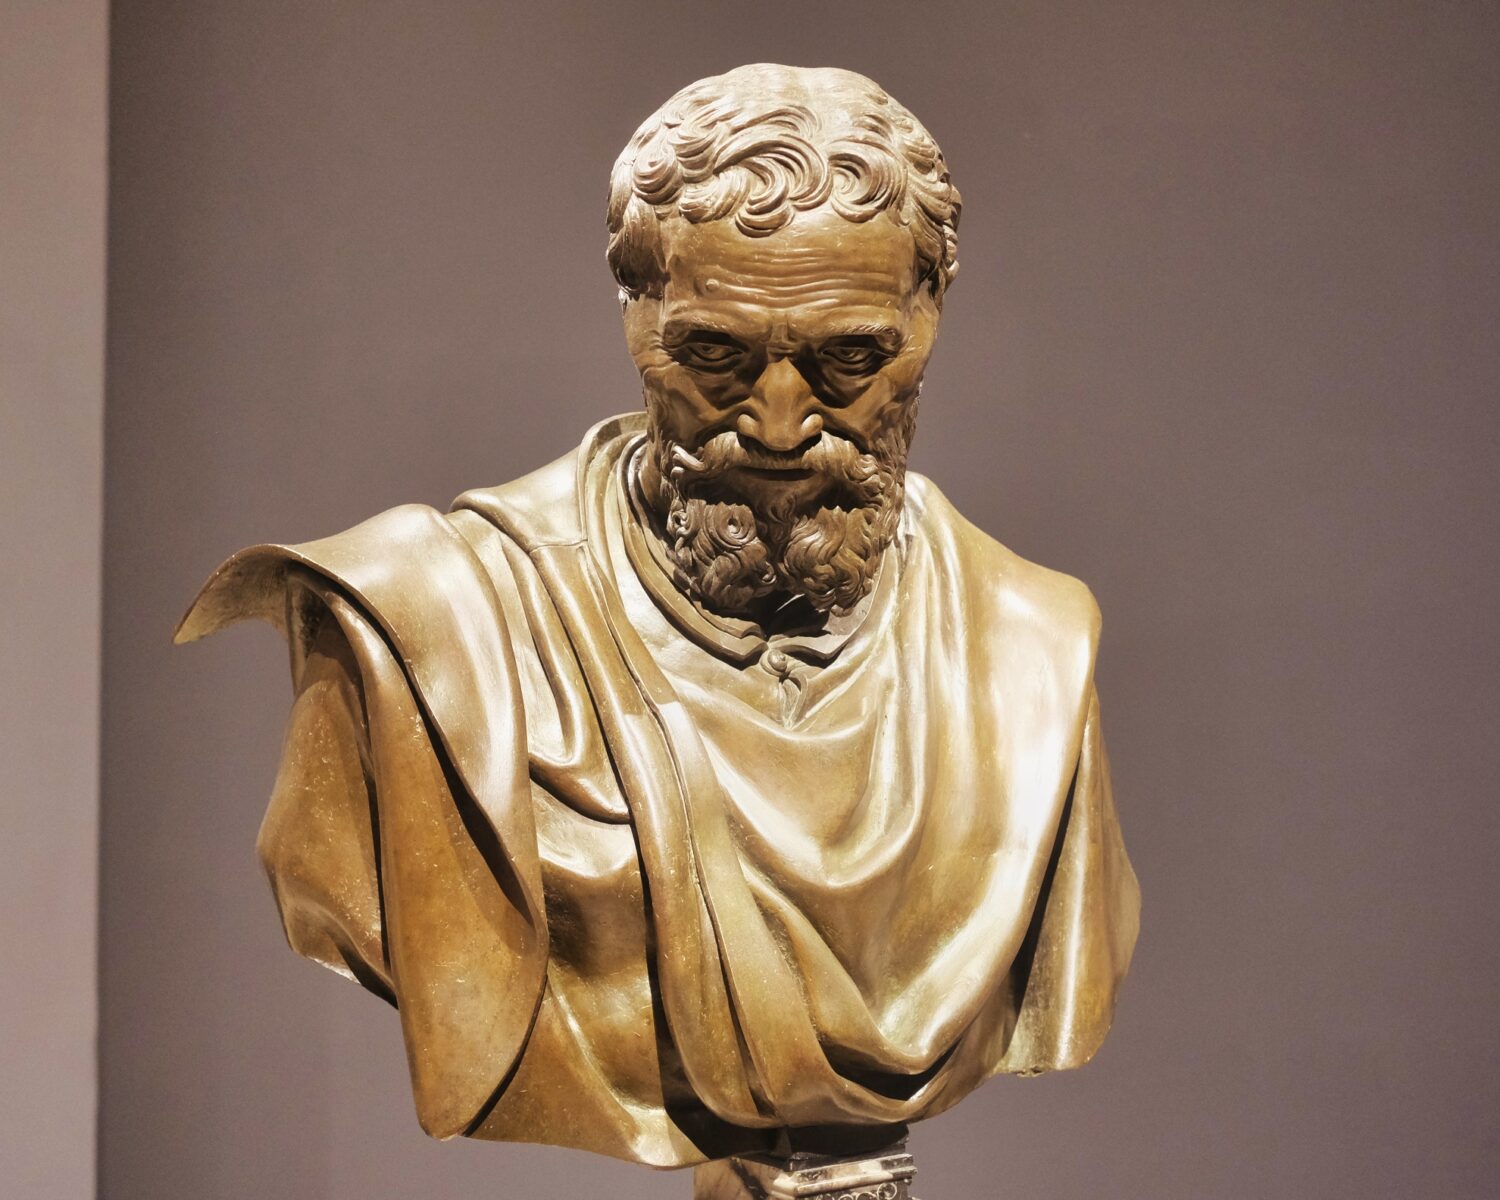 Daniele di Volterra’s bust of Michelangelo on display in Accademia Gallery